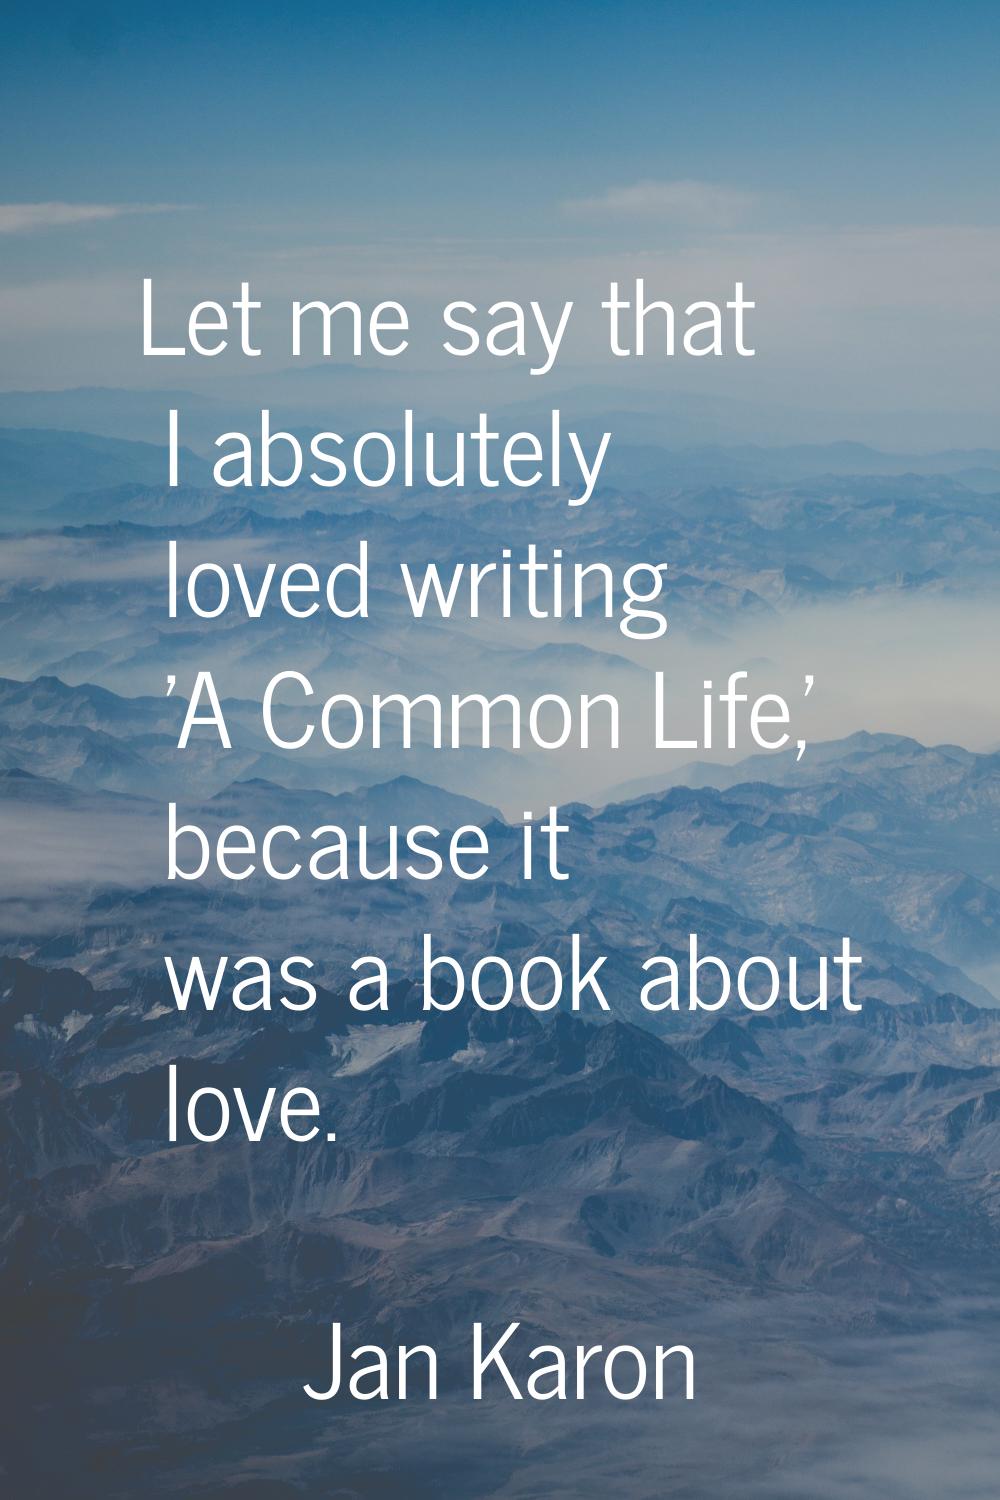 Let me say that I absolutely loved writing 'A Common Life,' because it was a book about love.